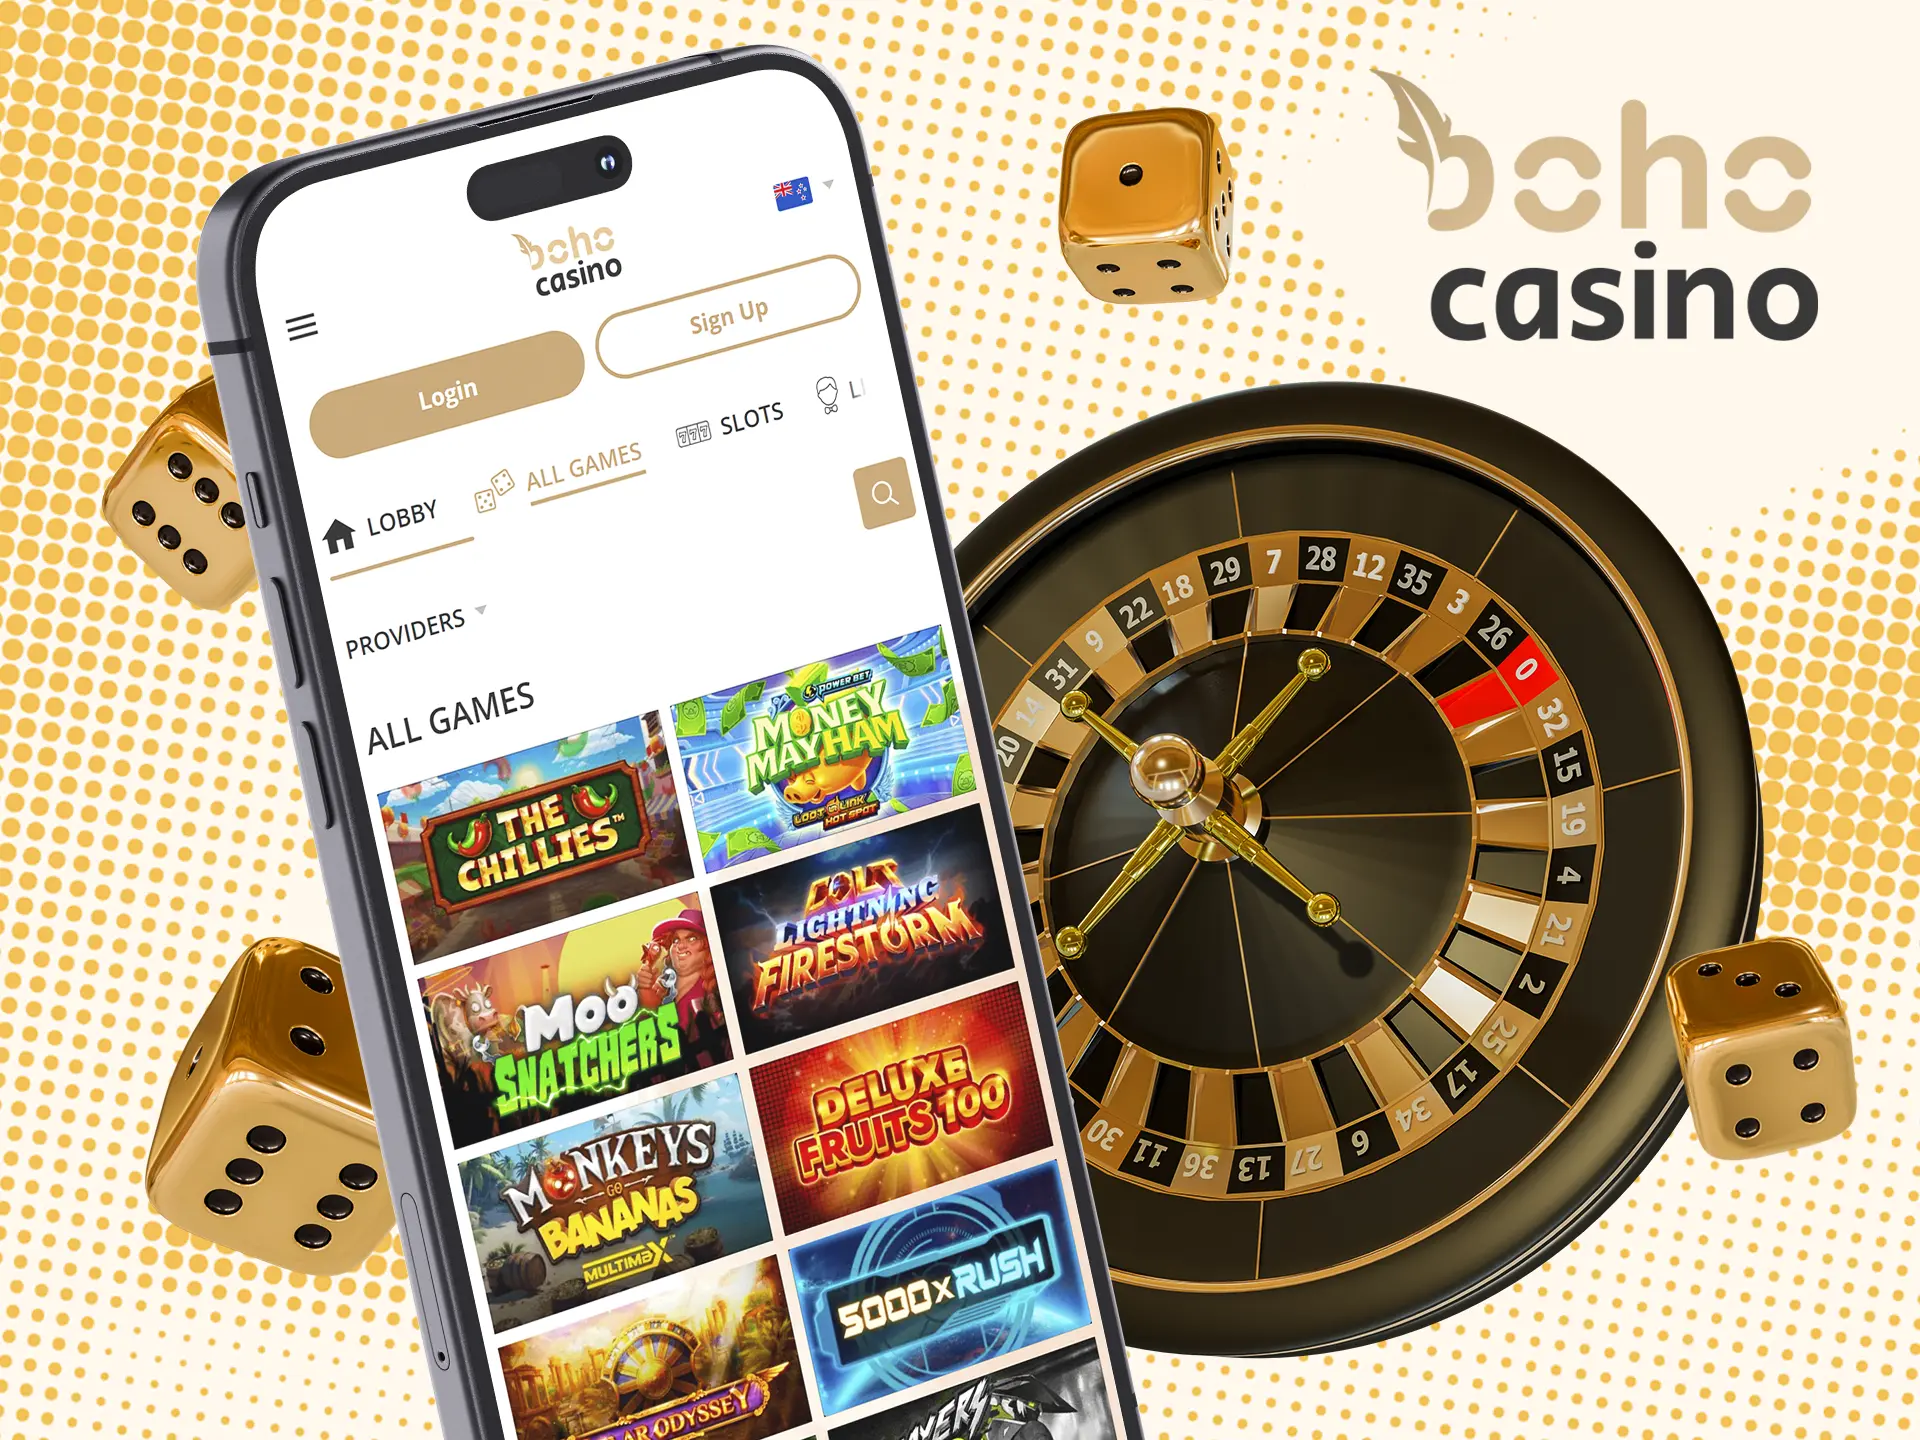 The mobile version of Boho Casino is simple and easy to use.